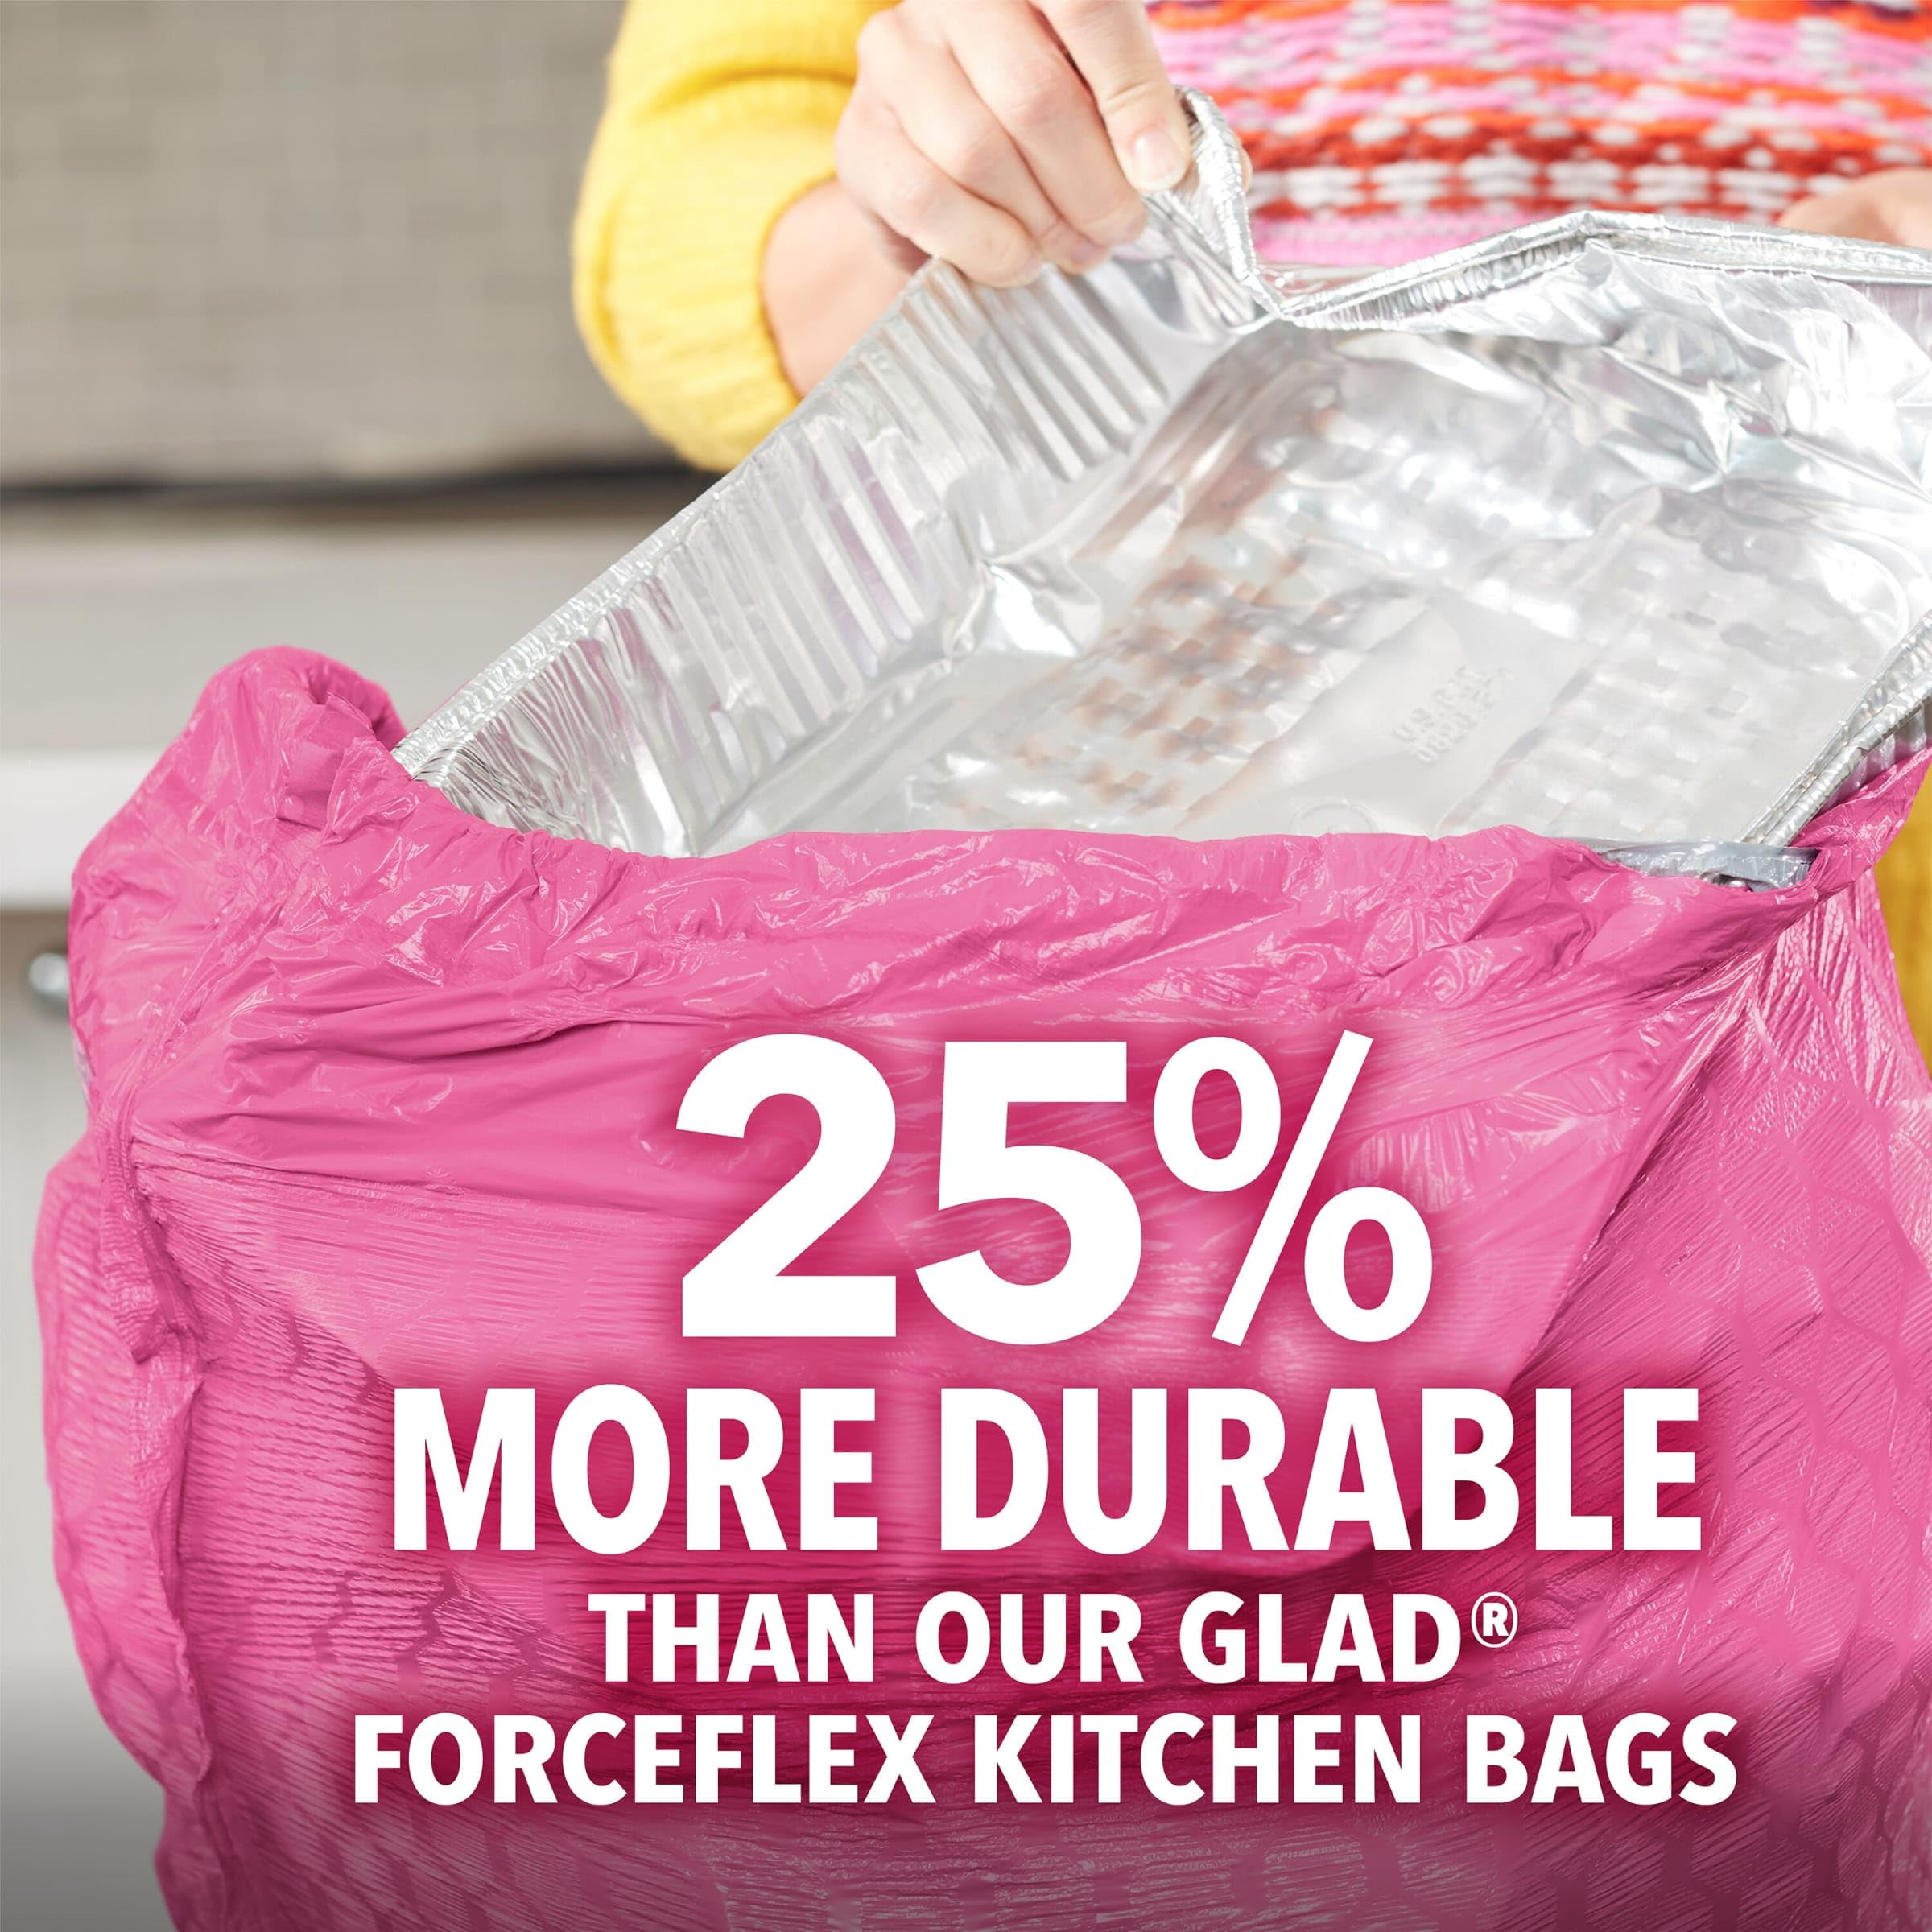 Glad ForceFlex with Clorox Mountain Air Scent Large Drawstring Trash Bags,  25 ct - King Soopers